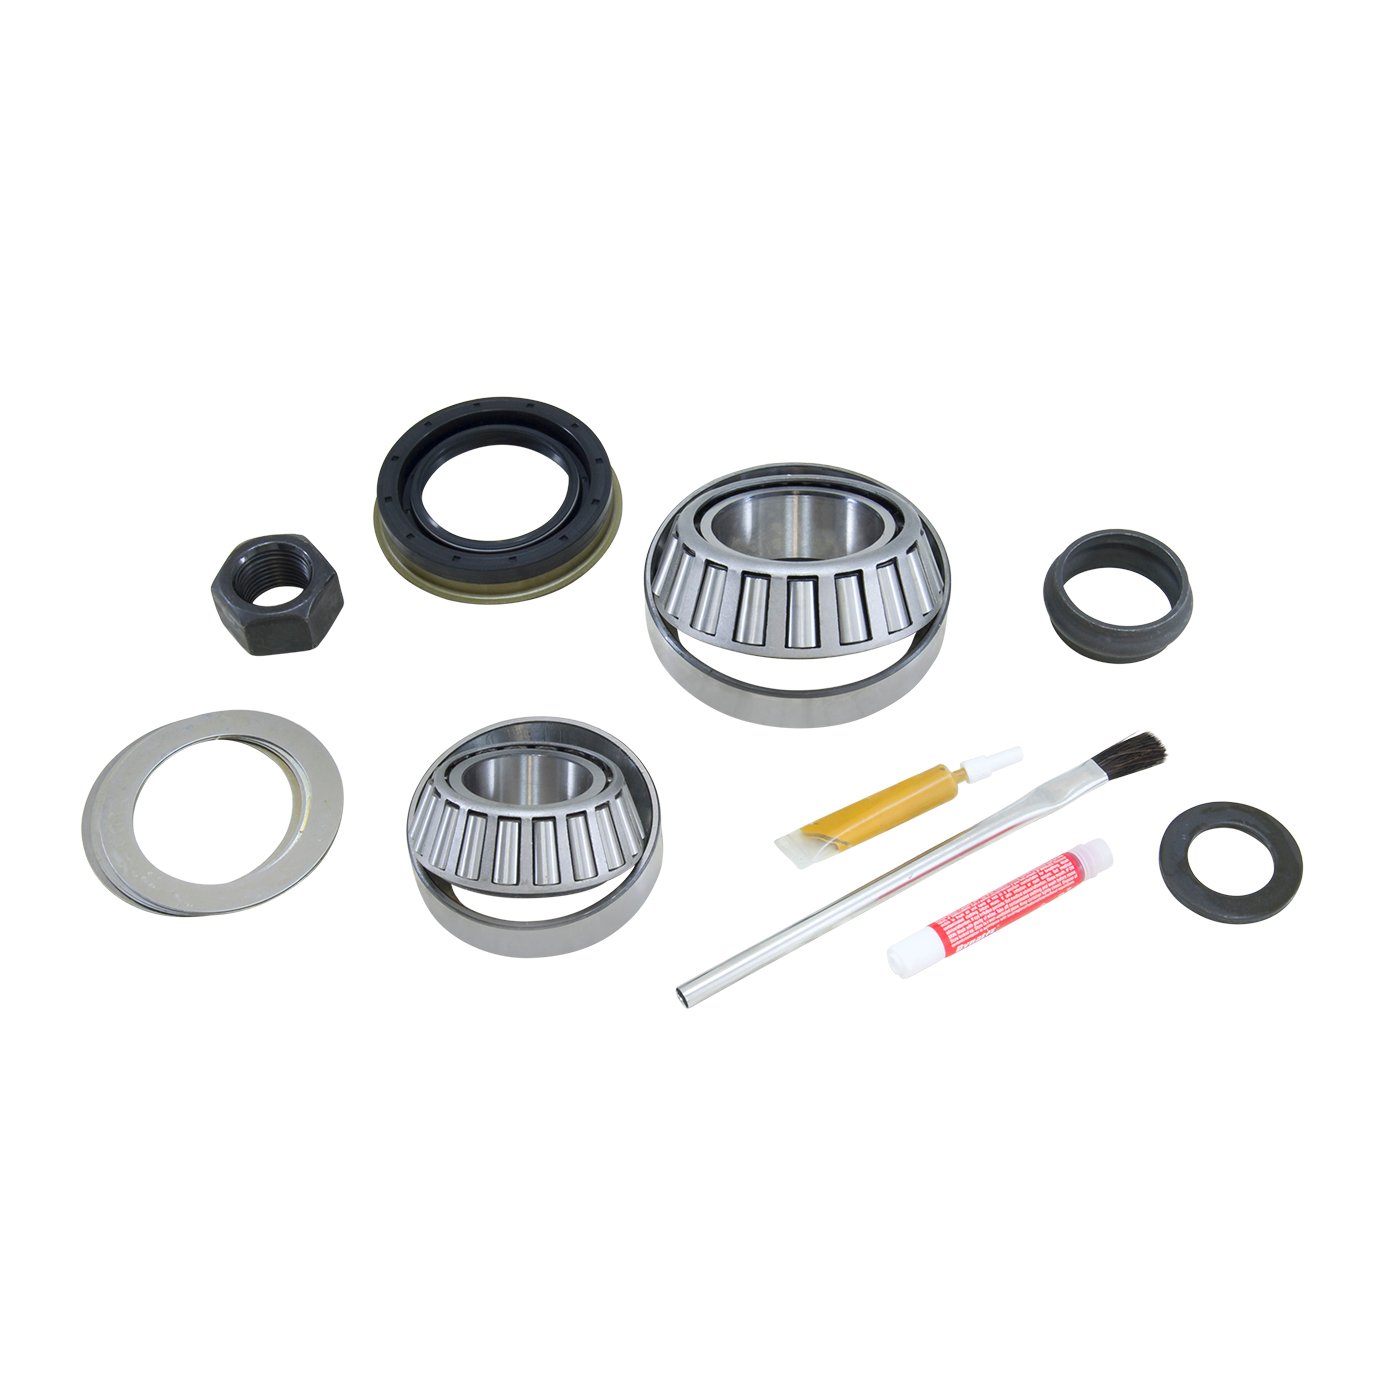 Pinion Install Kit For Dana 50 Differential (Straight Axle, Not Ifs)